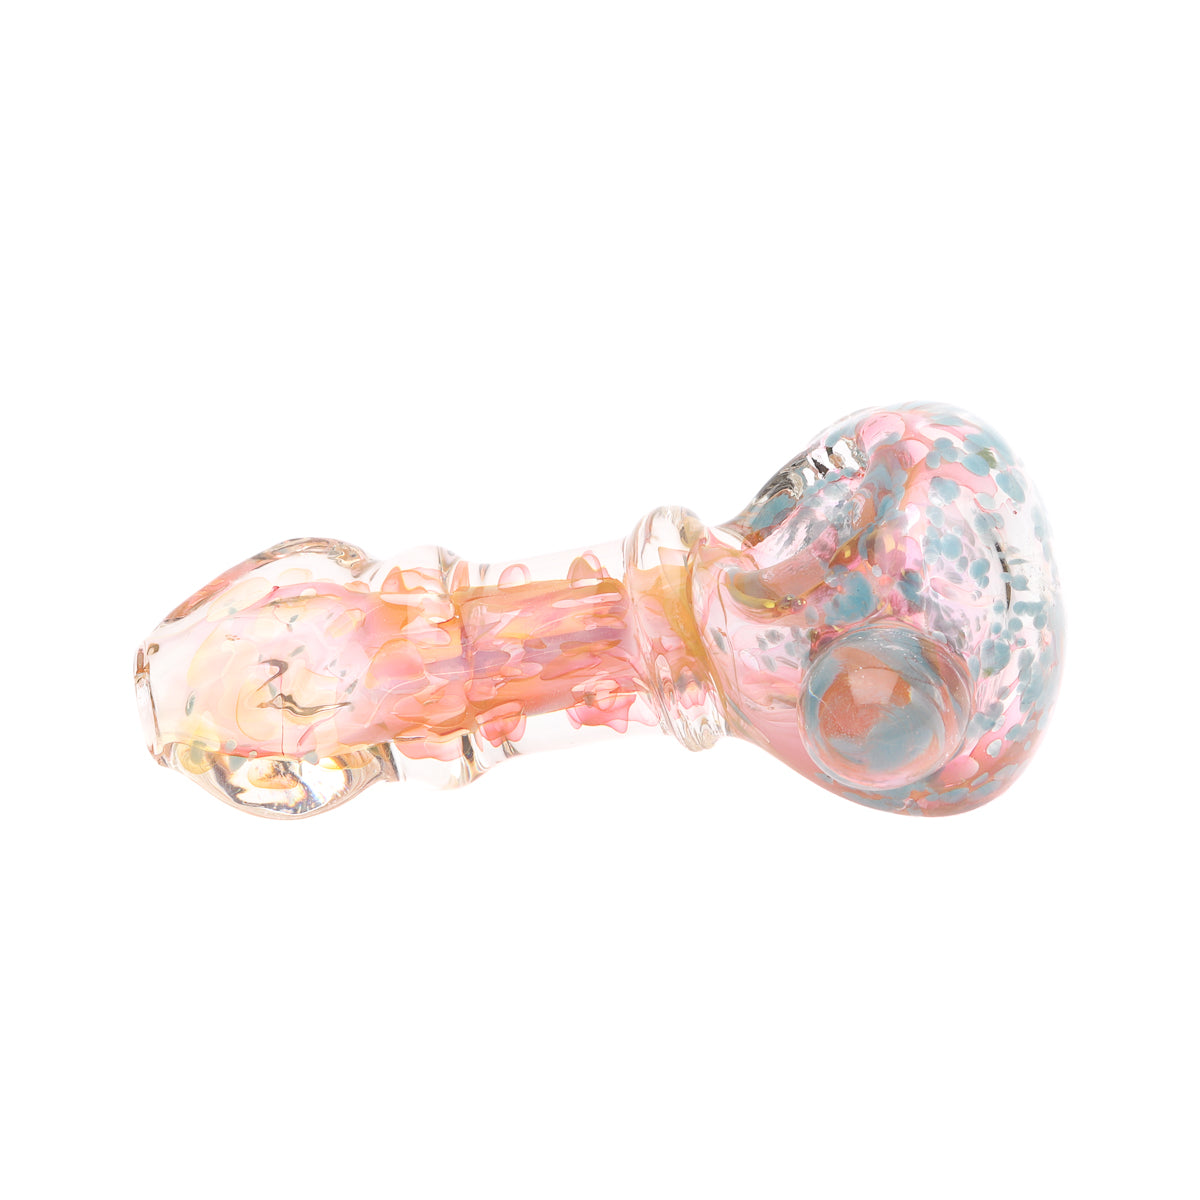 Cotton Candy Frit Glass Hand Pipe